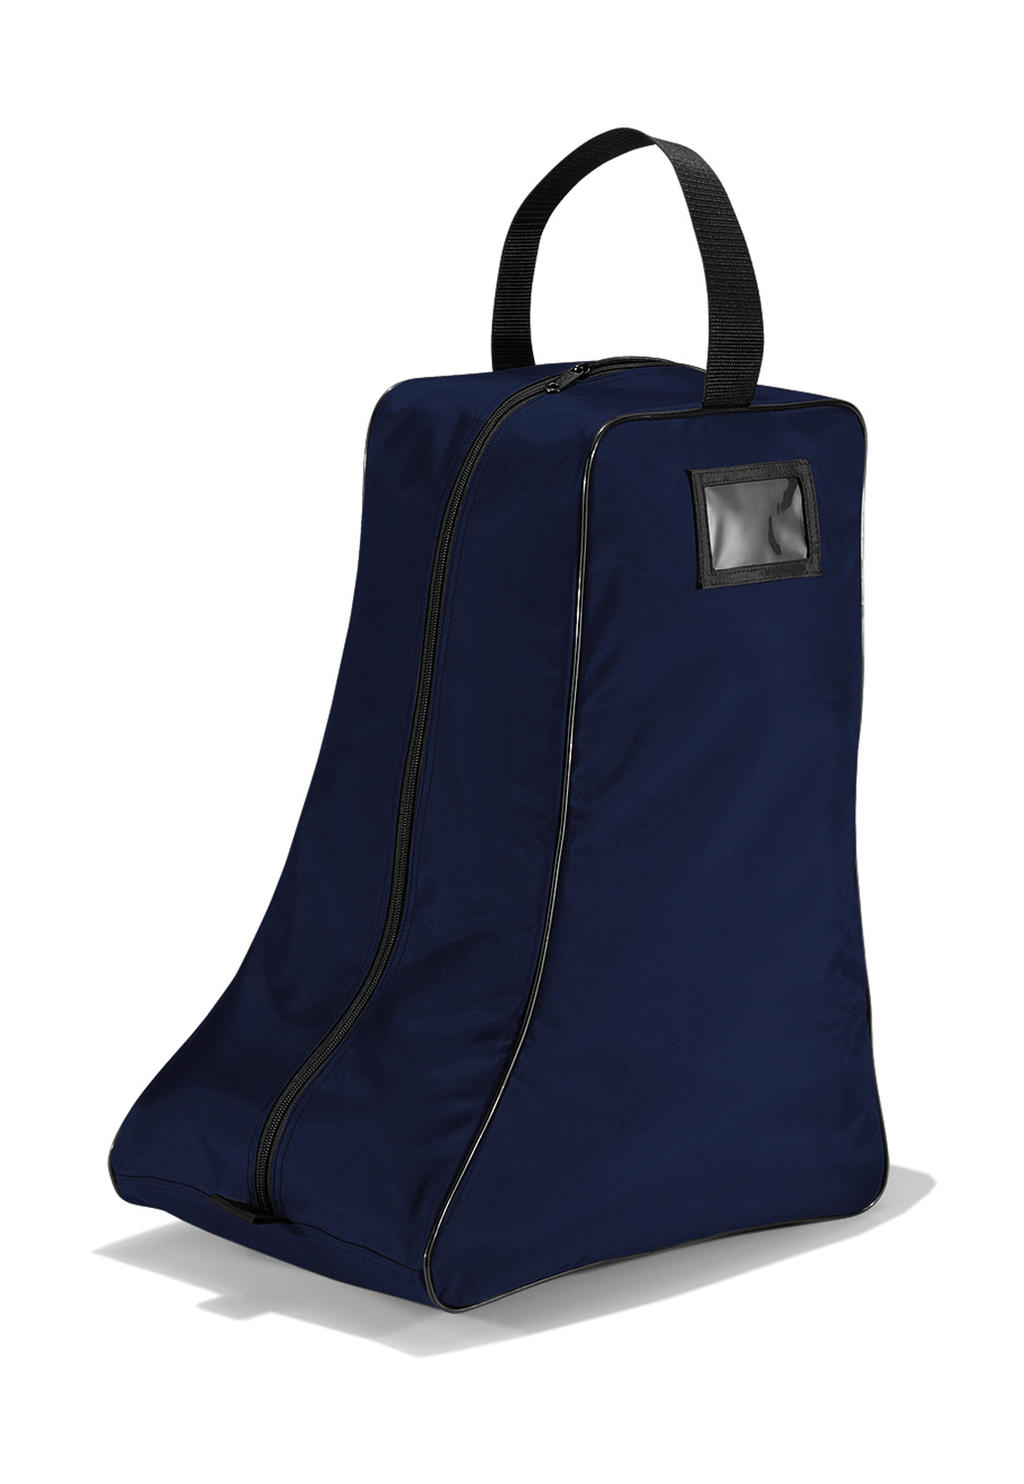  Boots Bag in Farbe Navy/Black